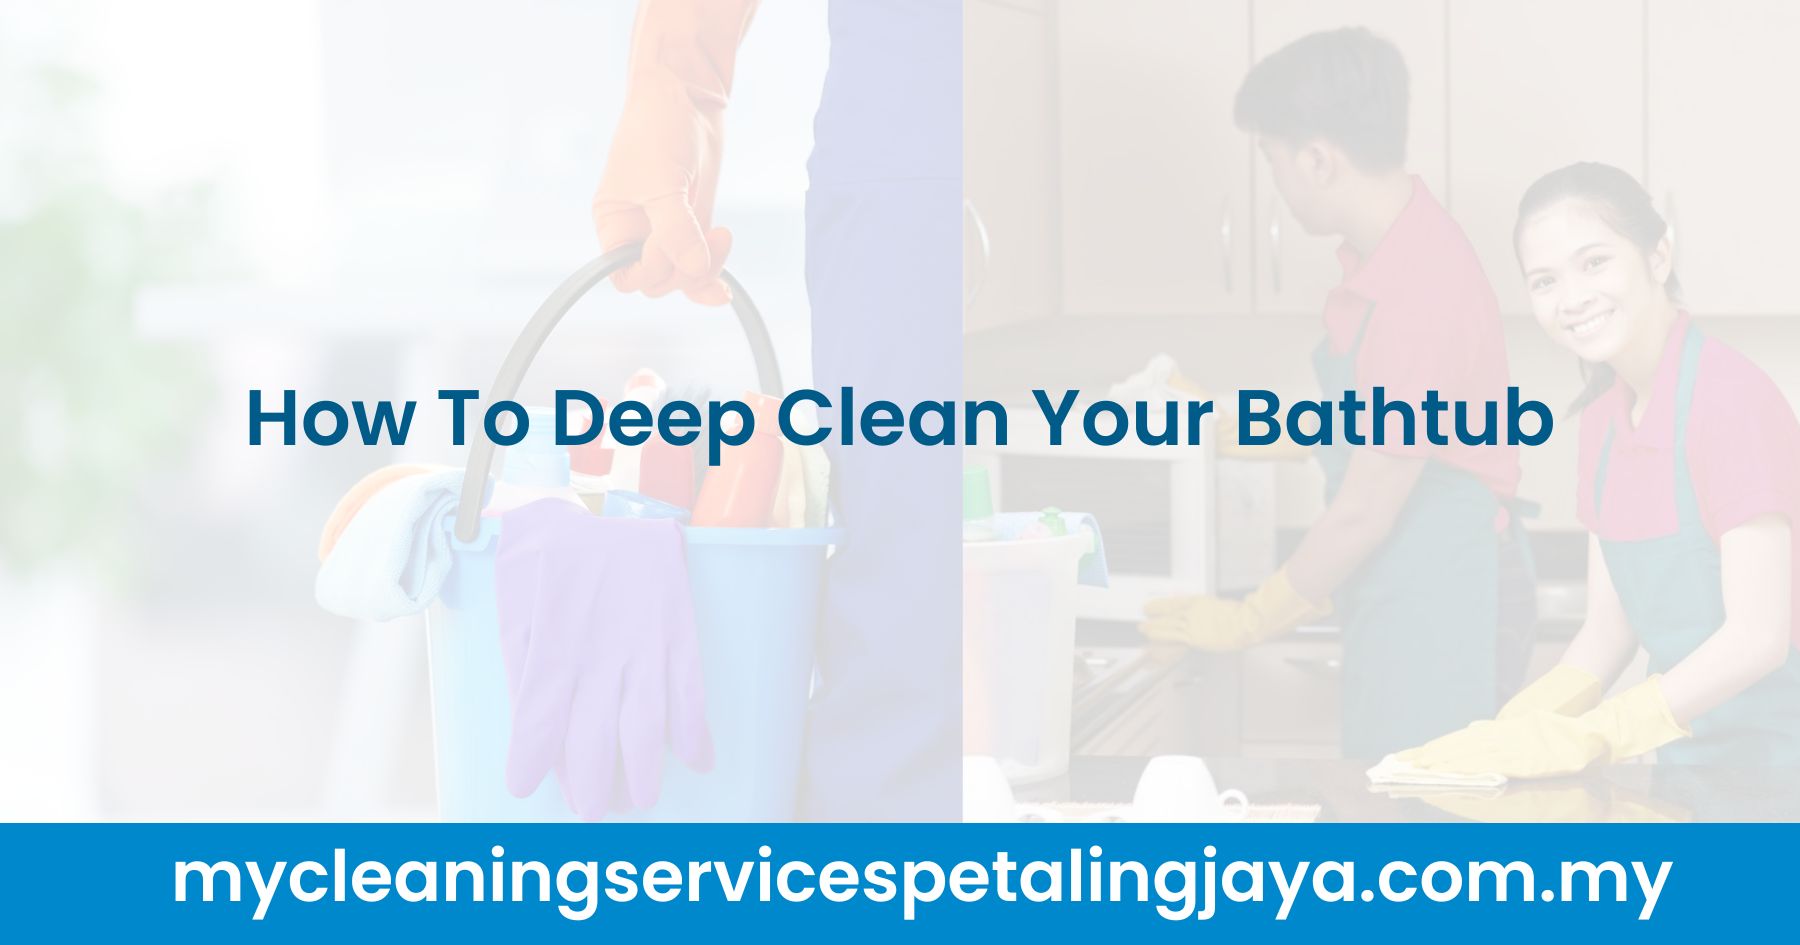 How To Deep Clean Your Bathtub